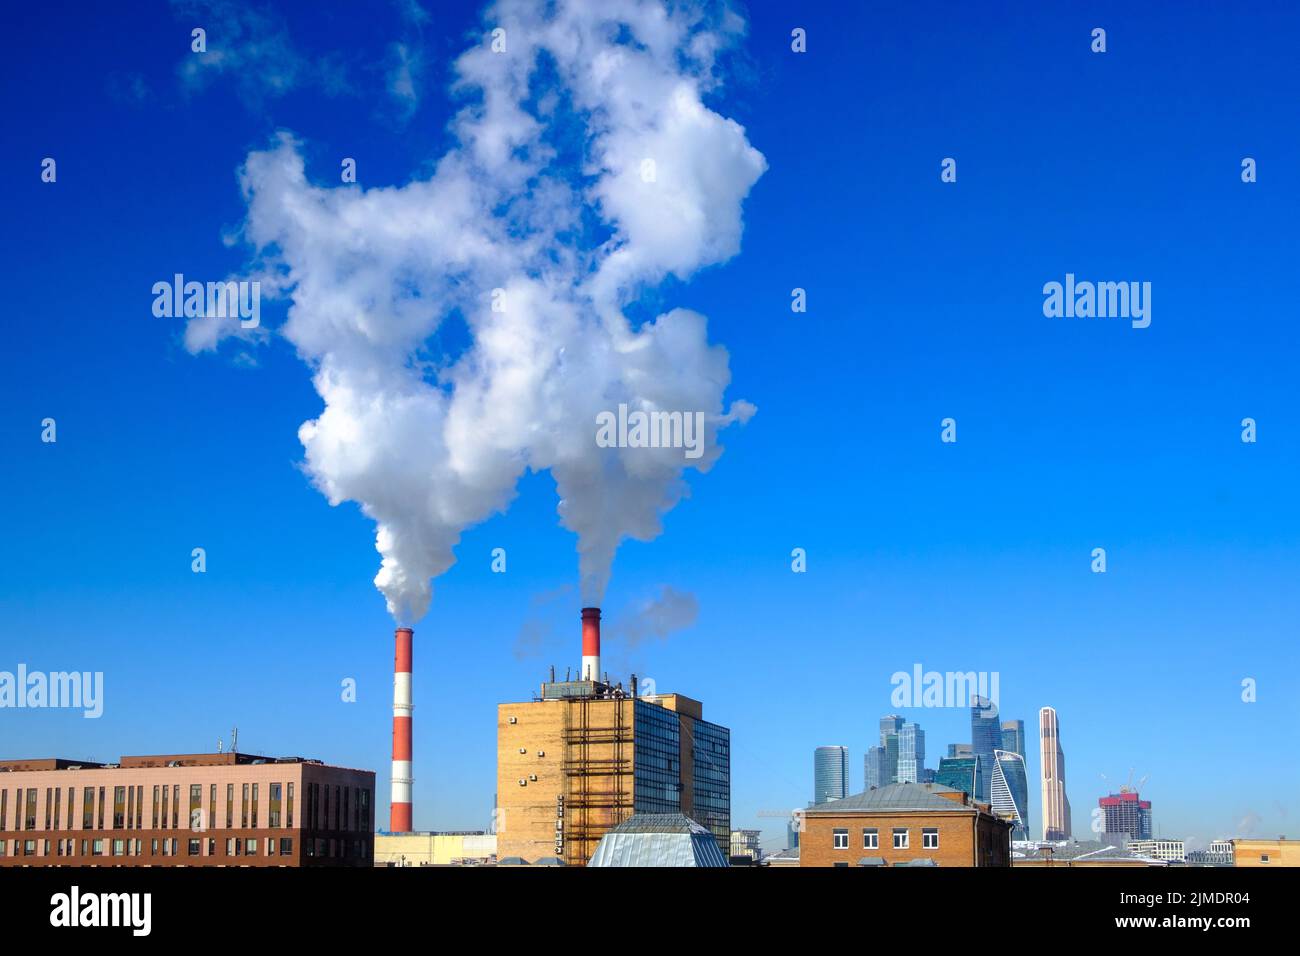 White puffs of smoke rise up from the industrial chimneys above the city in the blue cloudless sky. Stock Photo